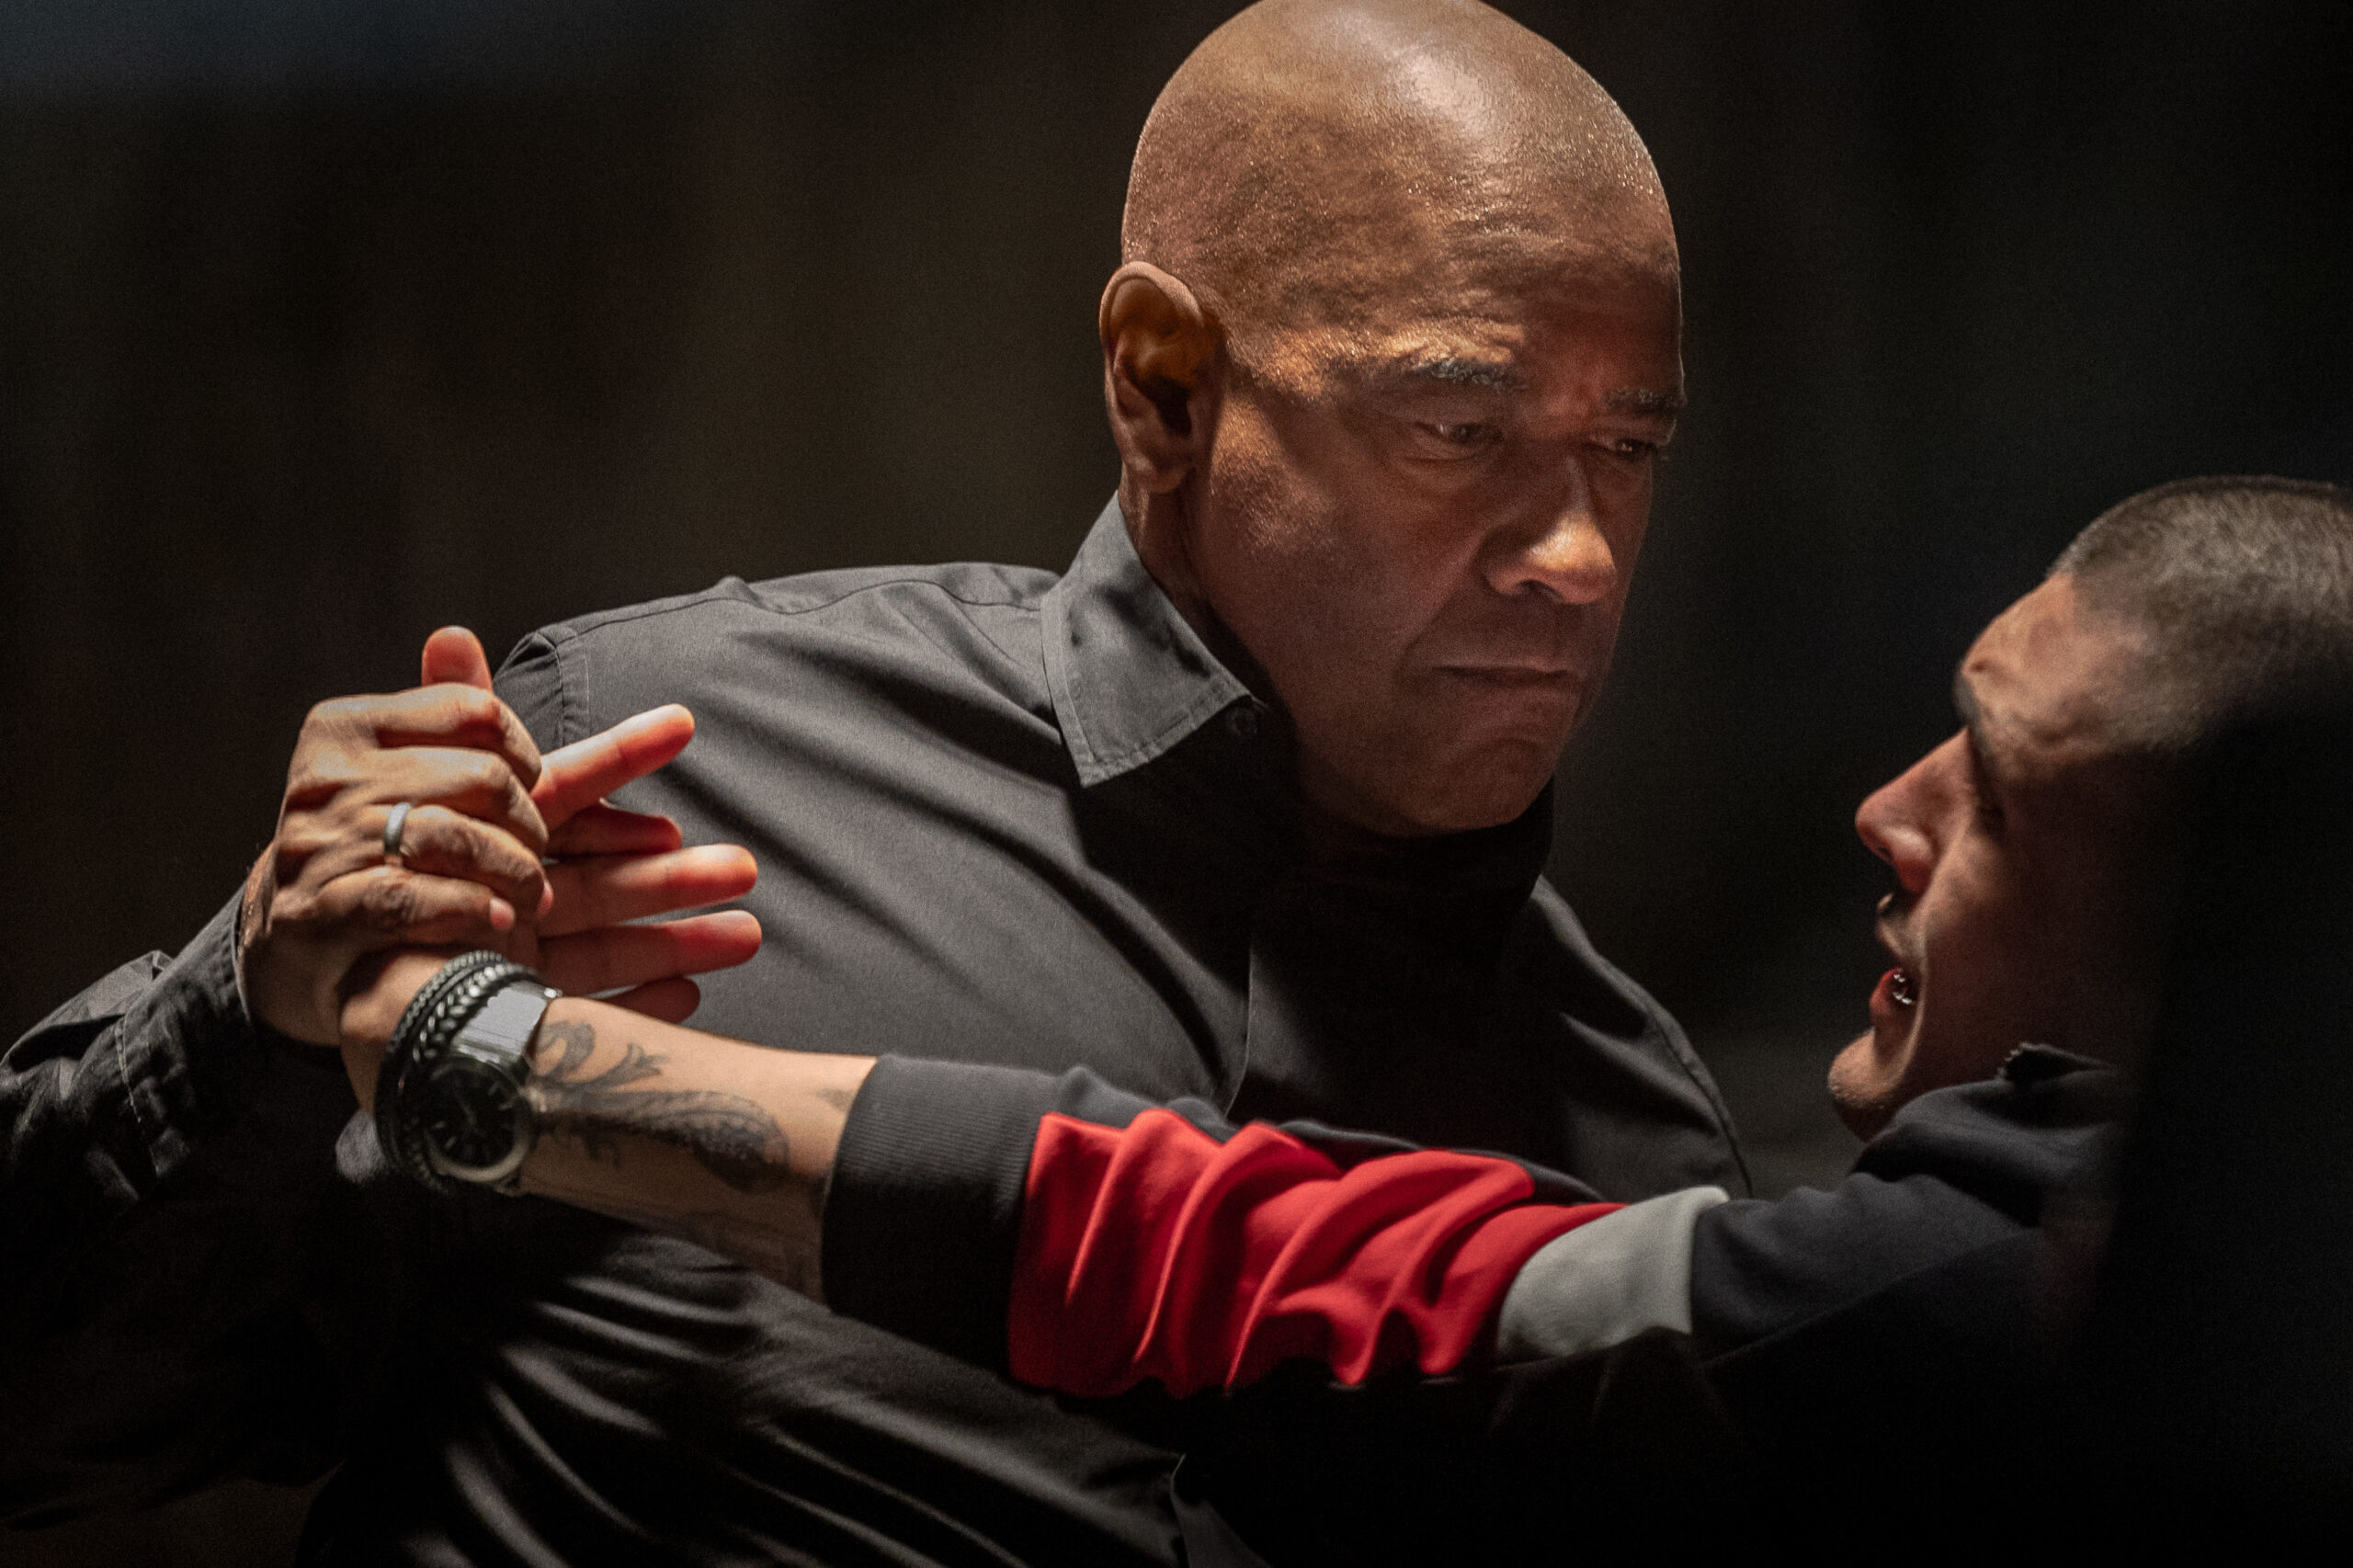 THE EQUALIZER 3 – THE FINAL CHAPTER – Filmkritik